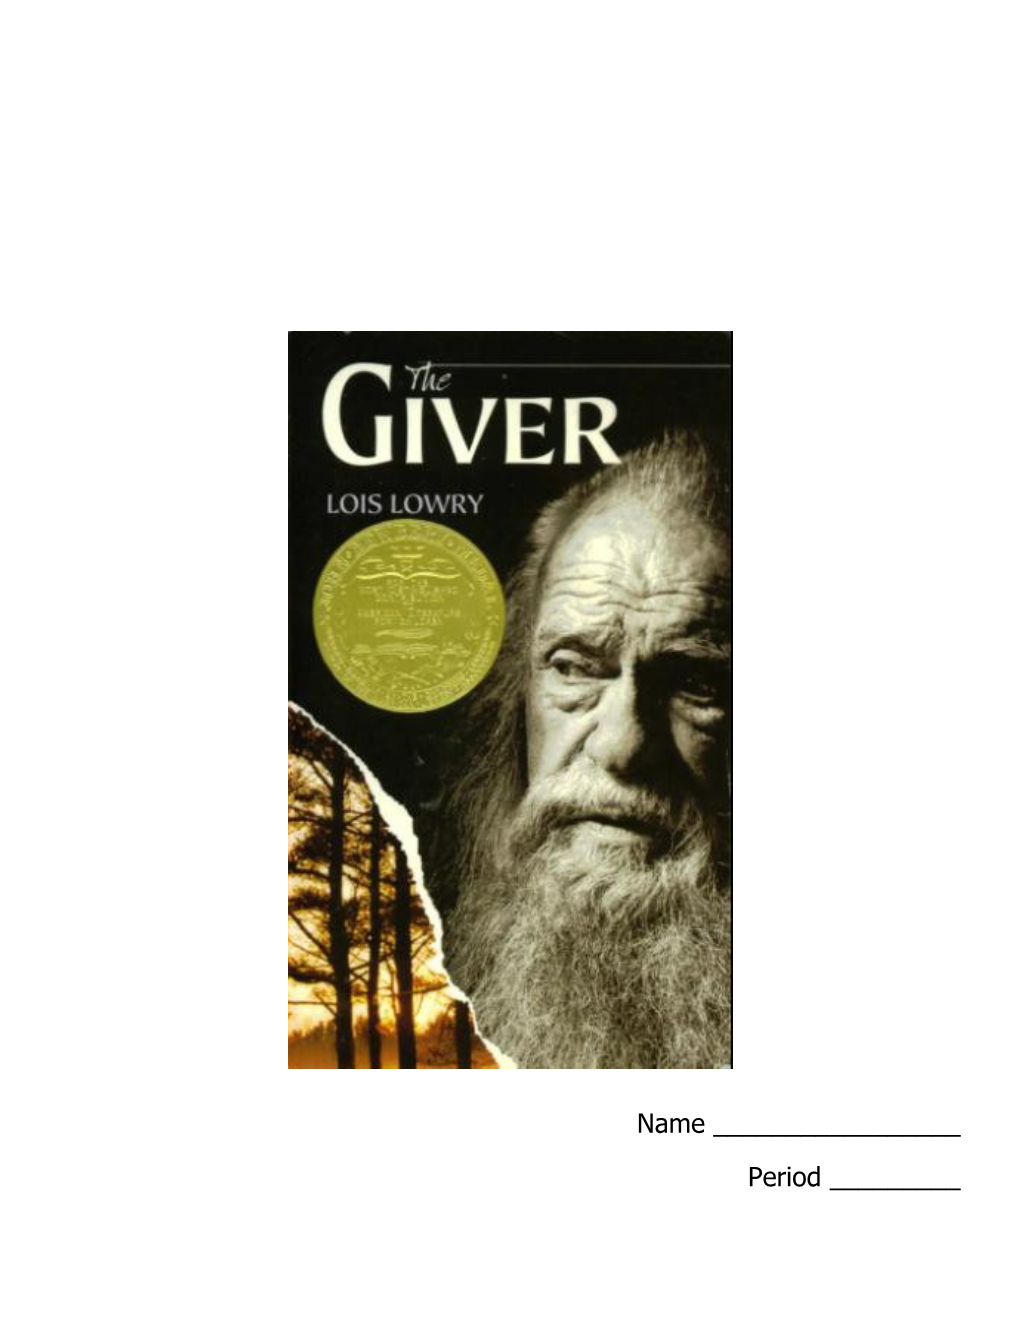 Pre-Reading: the Giver by Lois Lowry